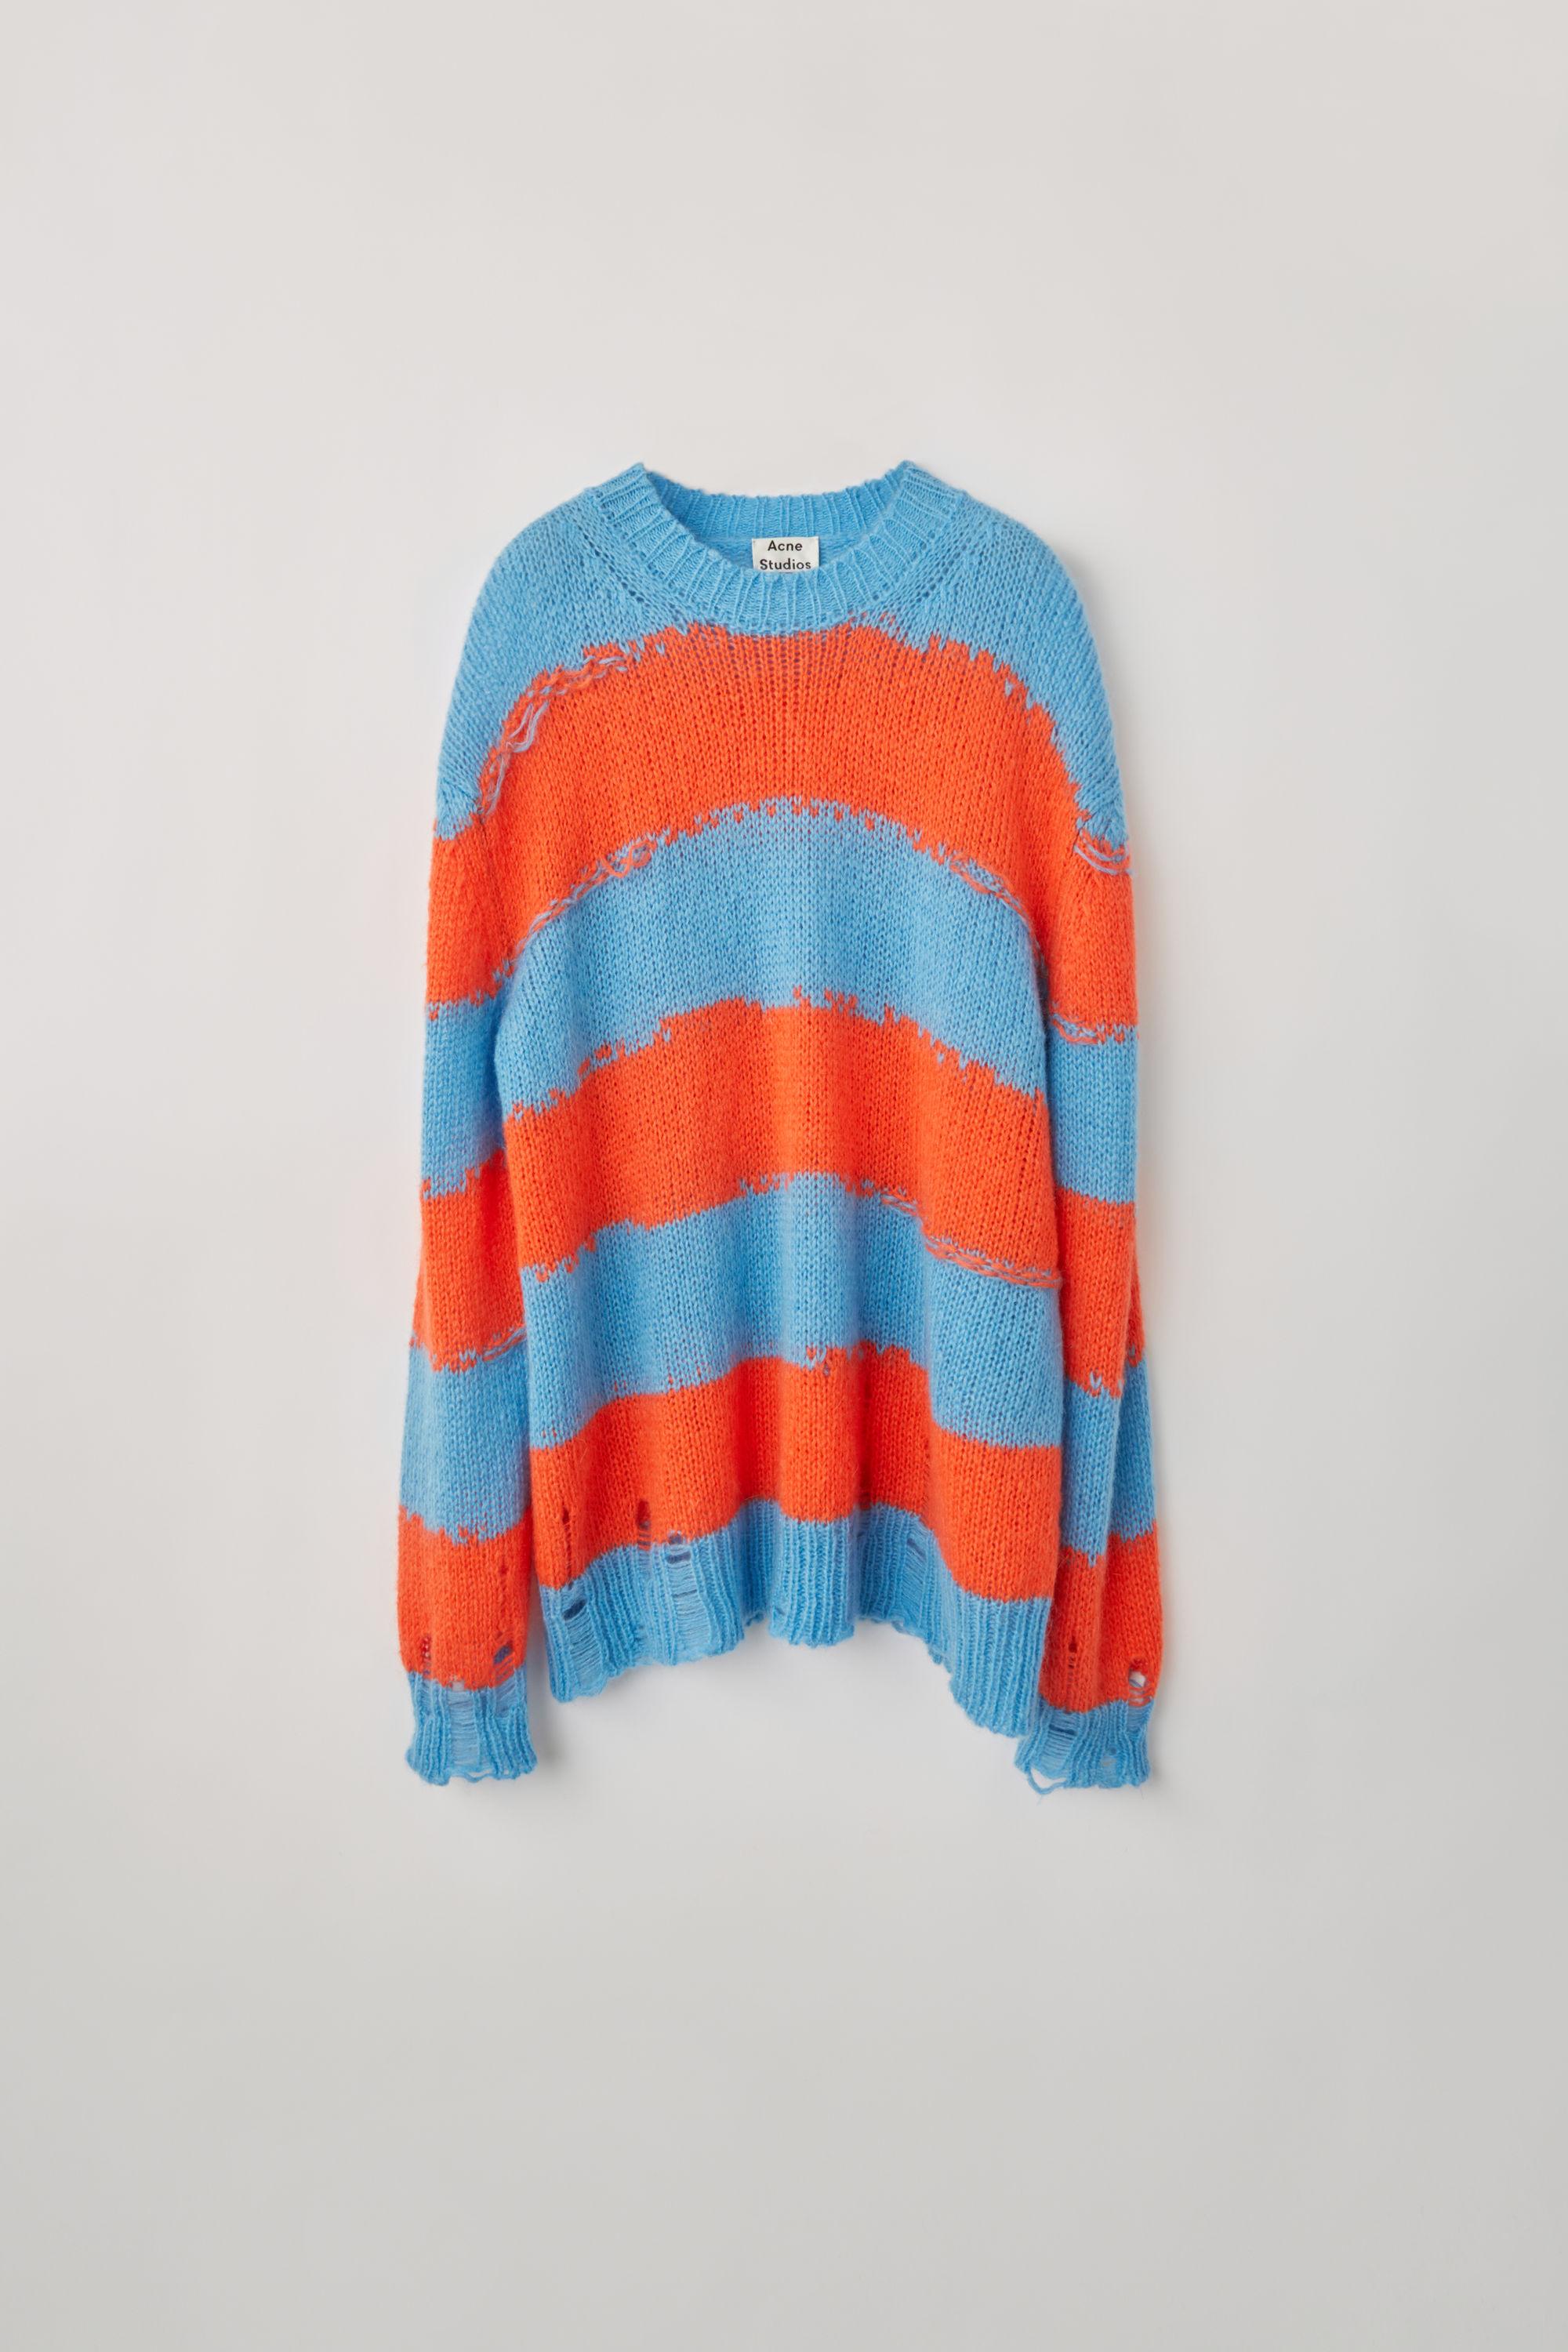 Acne Studios Synthetic Fn-wn-knit000151 Blue/coral Distressed Striped  Sweater - Lyst